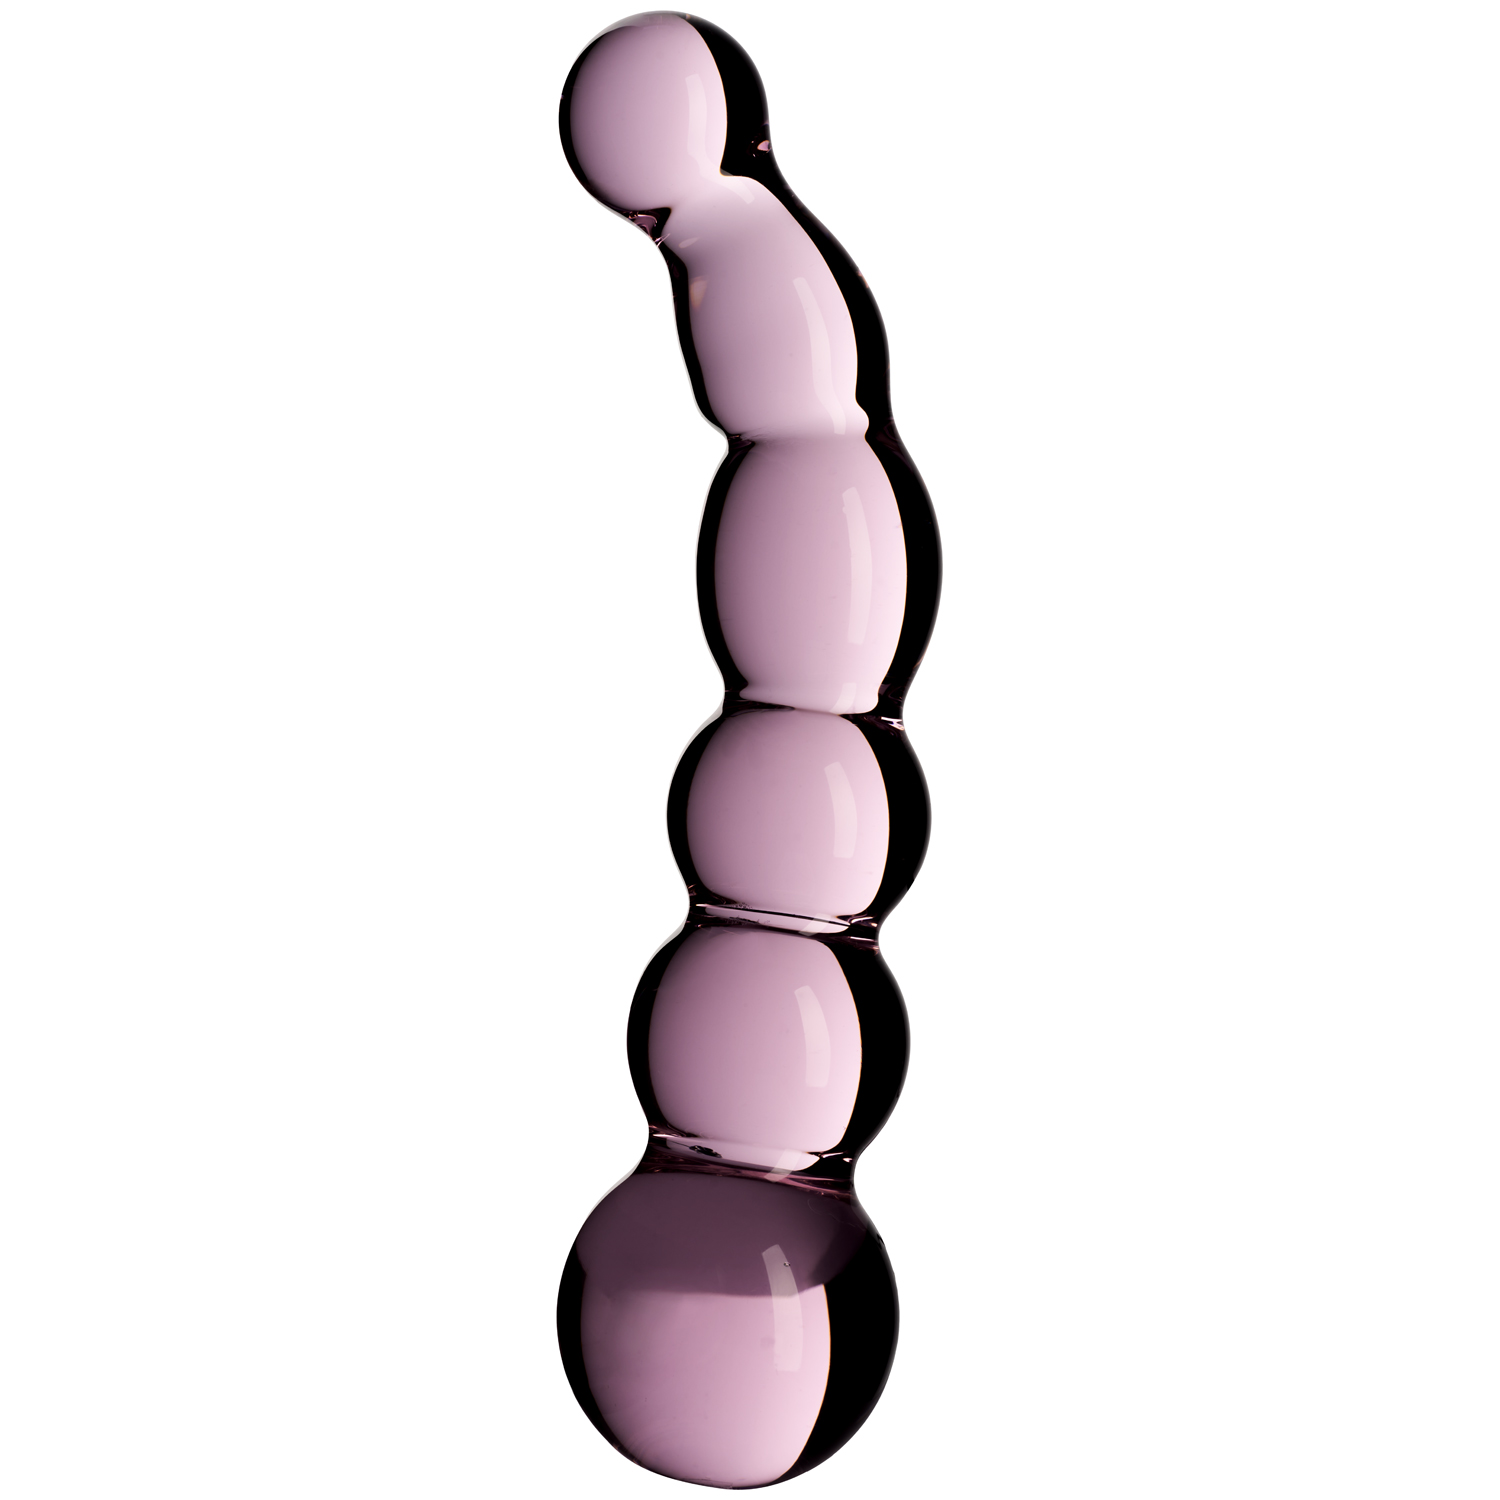 Sinful Rose Groove Glas Dildo 17,5 cm    - Pink thumbnail